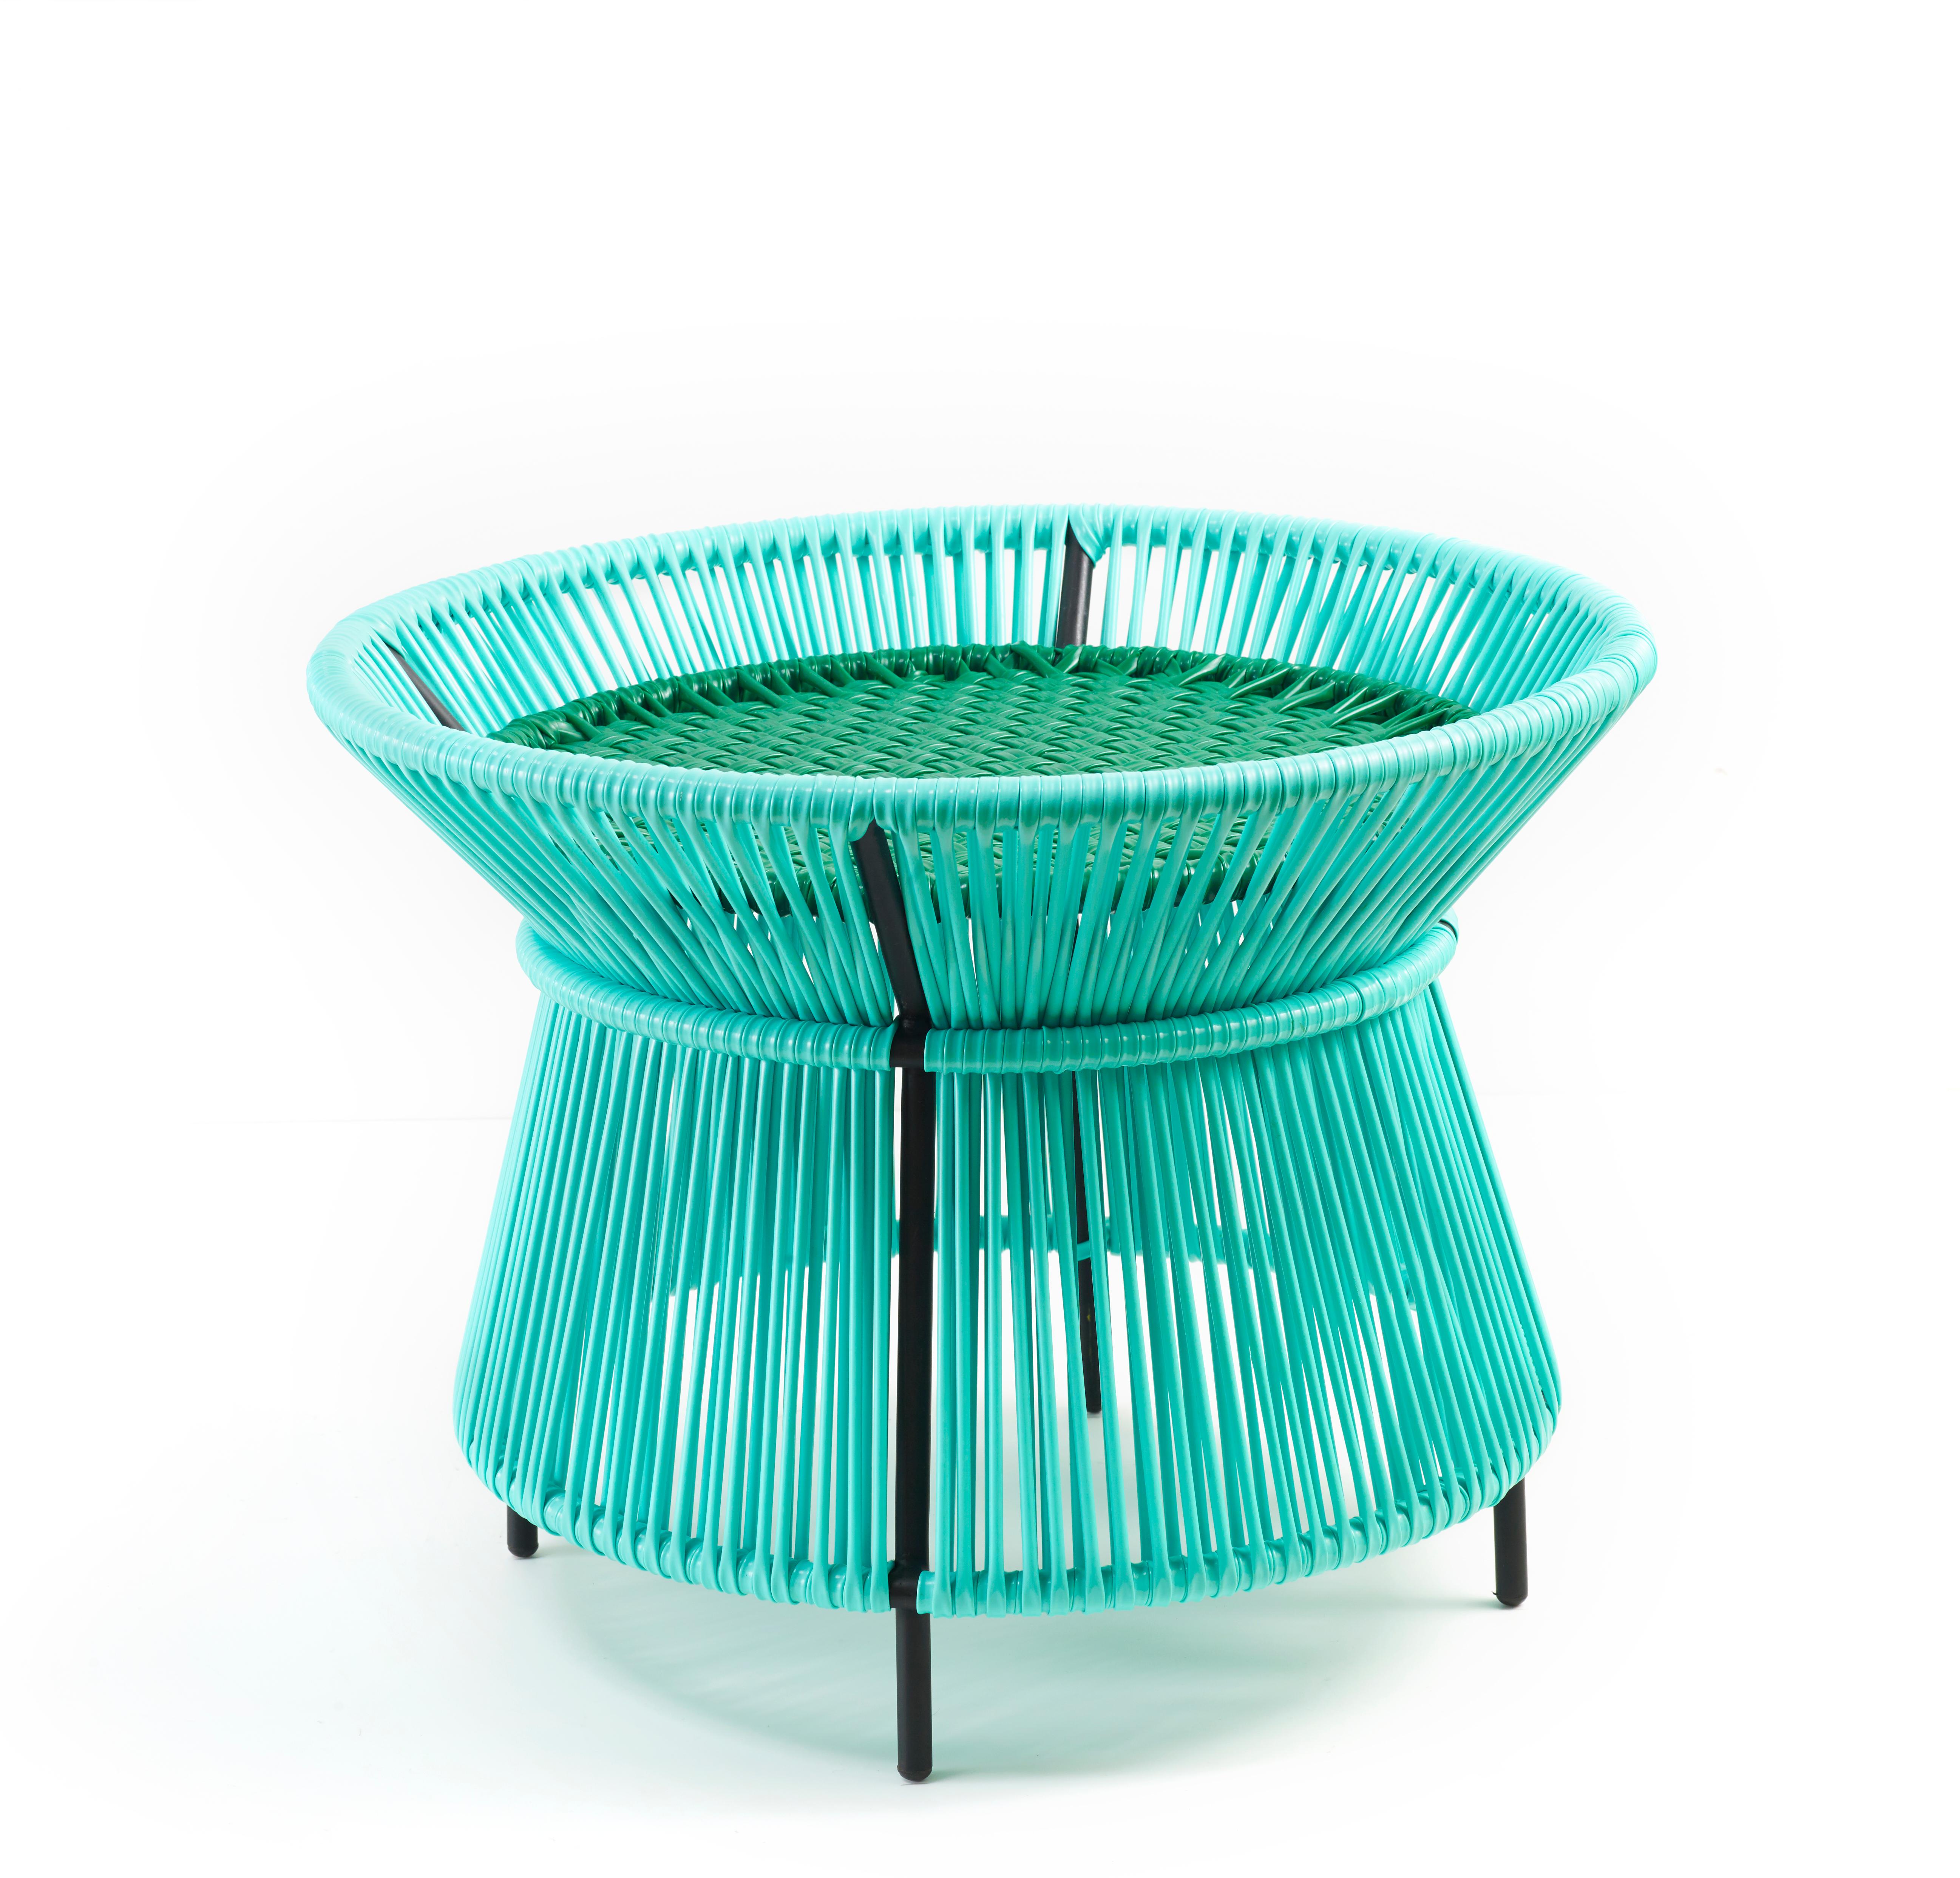 Mint caribe basket table by Sebastian Herkner
Materials: Galvanized and powder-coated tubular steel. PVC strings are made from recycled plastic.
Technique: Made from recycled plastic and weaved by local craftspeople in Colombia. 
Dimensions: